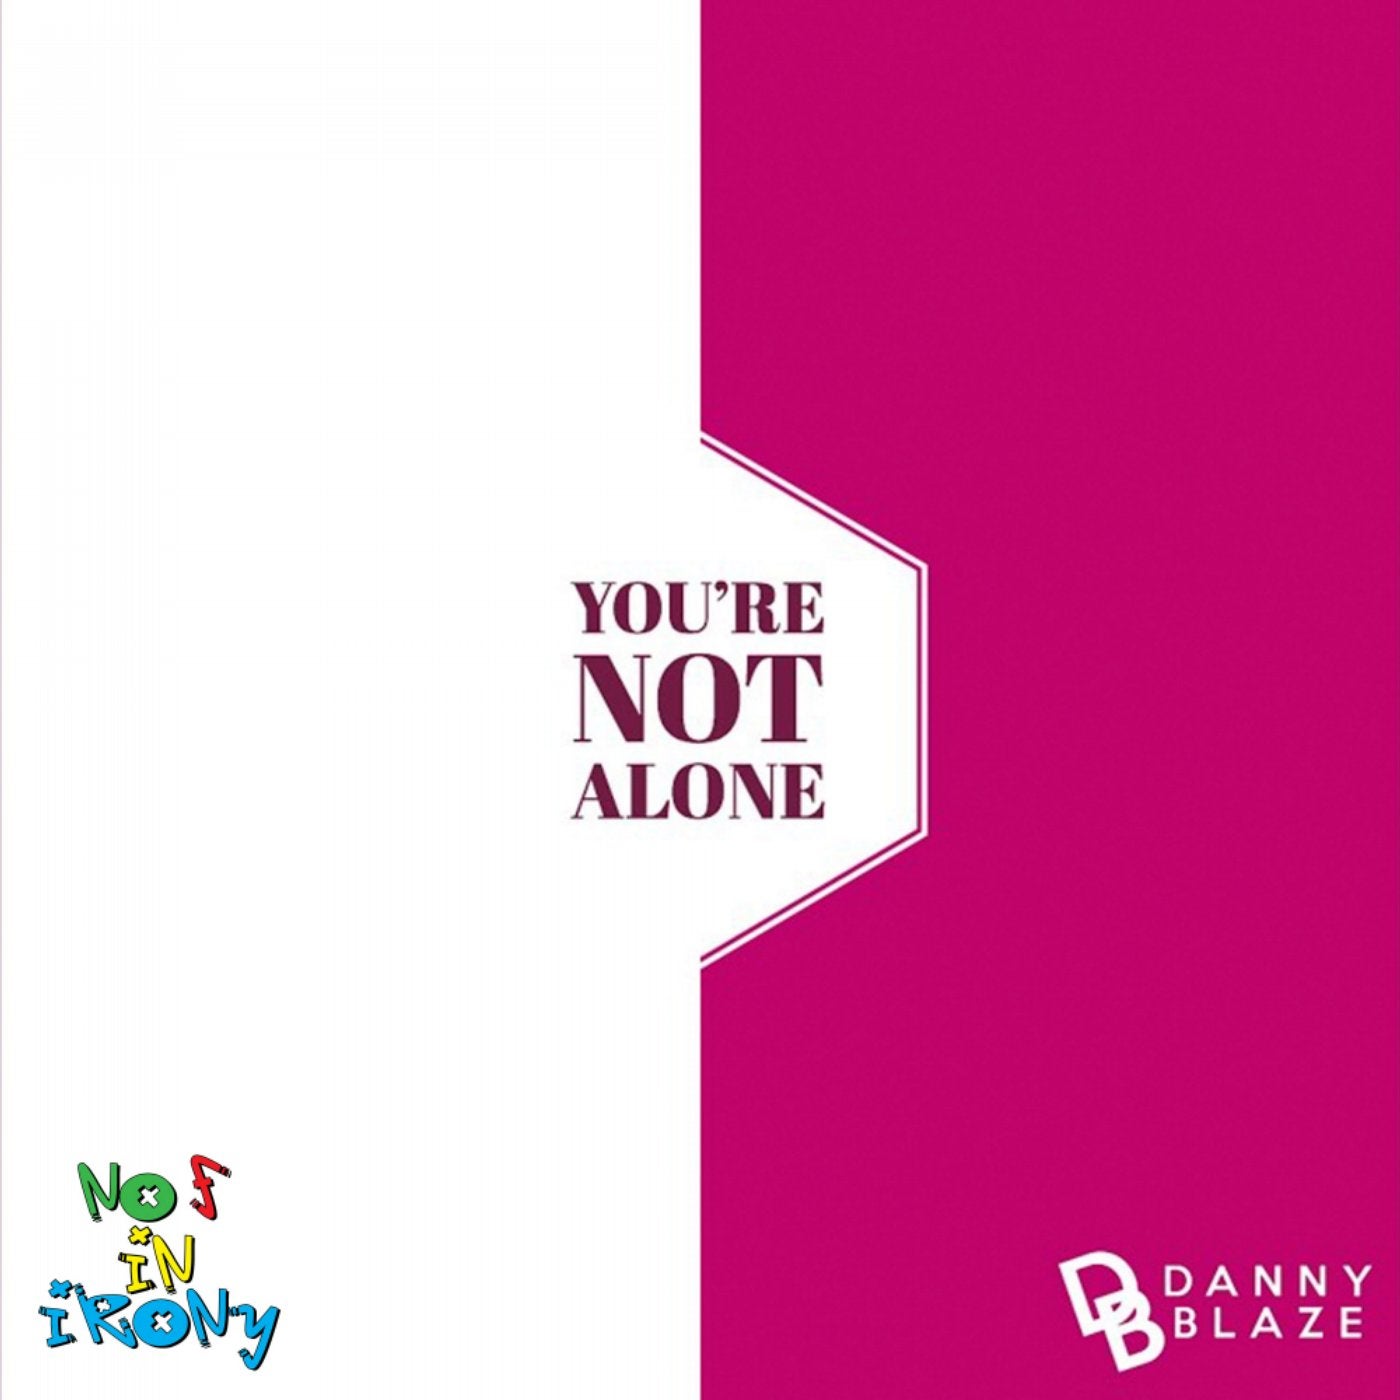 You're Not Alone (No F In Irony Remix)